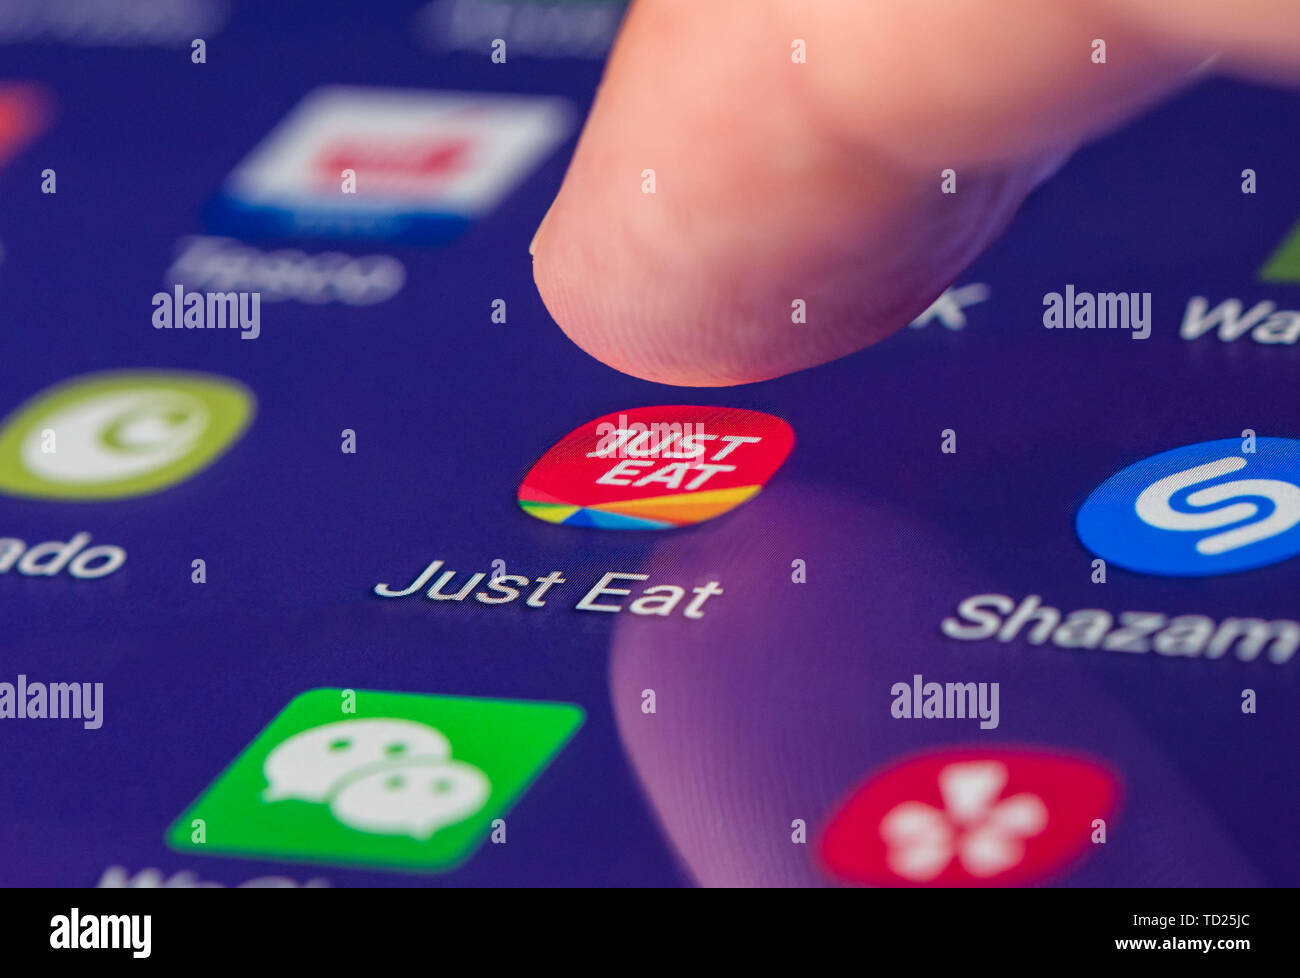 Finger pressing the Just Eat app icon on a touchscreen of a tablet or smartphone mobile device, to order fast food online. Stock Photo